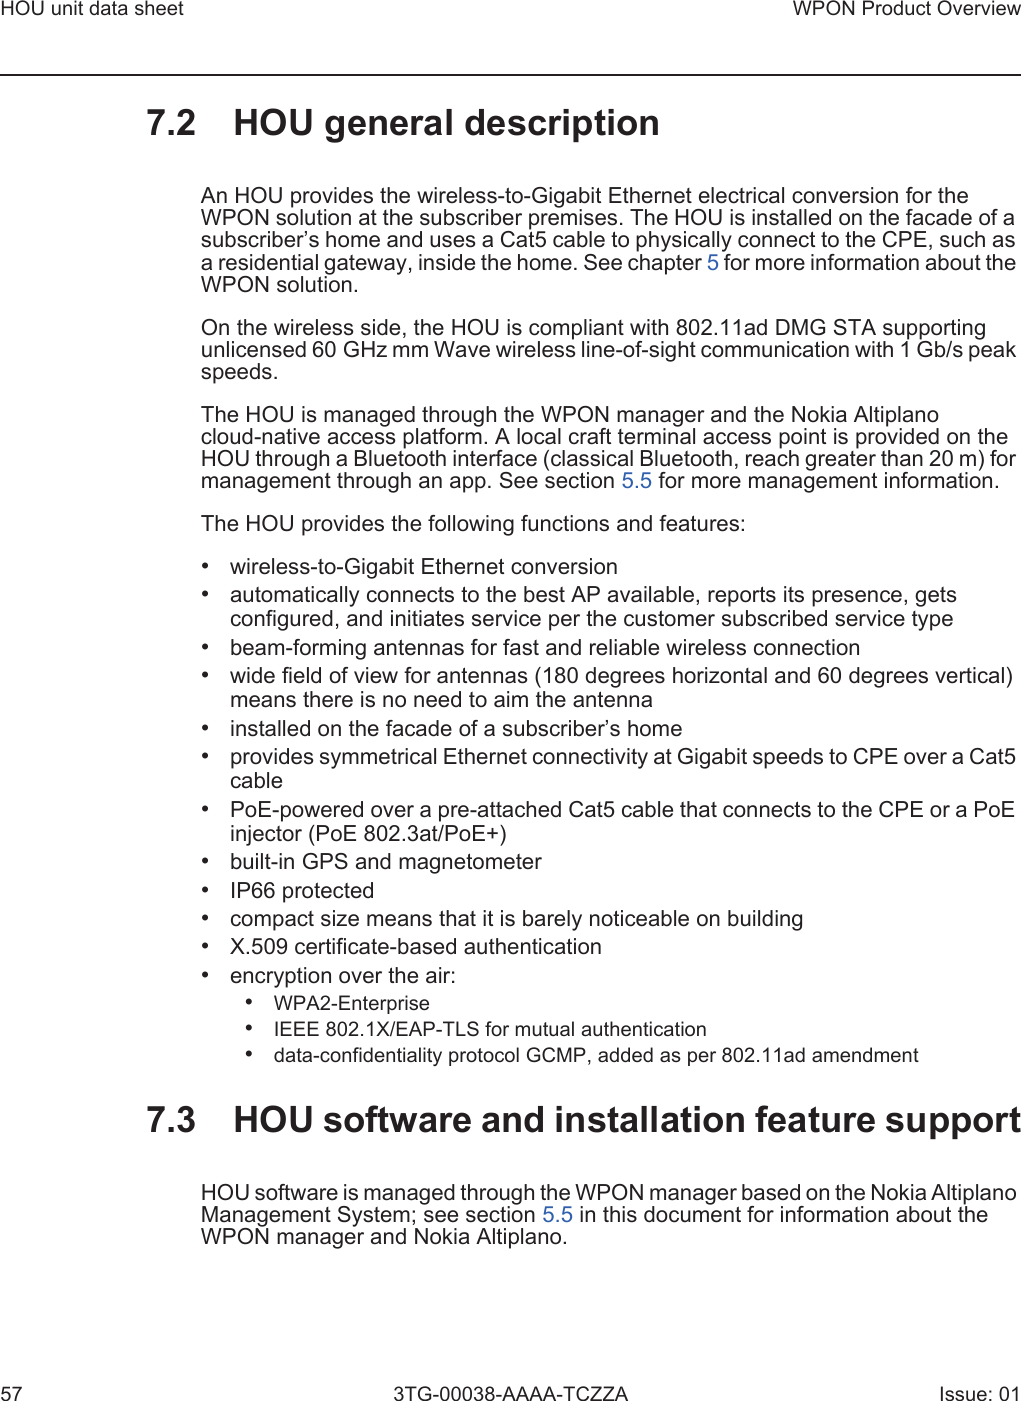 HOU unit data sheet57WPON Product Overview3TG-00038-AAAA-TCZZA Issue: 017.2 HOU general descriptionAn HOU provides the wireless-to-Gigabit Ethernet electrical conversion for the WPON solution at the subscriber premises. The HOU is installed on the facade of a subscriber’s home and uses a Cat5 cable to physically connect to the CPE, such as a residential gateway, inside the home. See chapter 5 for more information about the WPON solution.On the wireless side, the HOU is compliant with 802.11ad DMG STA supporting unlicensed 60 GHz mm Wave wireless line-of-sight communication with 1 Gb/s peak speeds.The HOU is managed through the WPON manager and the Nokia Altiplano cloud-native access platform. A local craft terminal access point is provided on the HOU through a Bluetooth interface (classical Bluetooth, reach greater than 20 m) for management through an app. See section 5.5 for more management information. The HOU provides the following functions and features:•wireless-to-Gigabit Ethernet conversion•automatically connects to the best AP available, reports its presence, getsconfigured, and initiates service per the customer subscribed service type•beam-forming antennas for fast and reliable wireless connection•wide field of view for antennas (180 degrees horizontal and 60 degrees vertical)means there is no need to aim the antenna•installed on the facade of a subscriber’s home•provides symmetrical Ethernet connectivity at Gigabit speeds to CPE over a Cat5cable•PoE-powered over a pre-attached Cat5 cable that connects to the CPE or a PoEinjector (PoE 802.3at/PoE+)•built-in GPS and magnetometer•IP66 protected•compact size means that it is barely noticeable on building•X.509 certificate-based authentication•encryption over the air:•WPA2-Enterprise•IEEE 802.1X/EAP-TLS for mutual authentication•data-confidentiality protocol GCMP, added as per 802.11ad amendment7.3 HOU software and installation feature supportHOU software is managed through the WPON manager based on the Nokia Altiplano Management System; see section 5.5 in this document for information about the WPON manager and Nokia Altiplano.